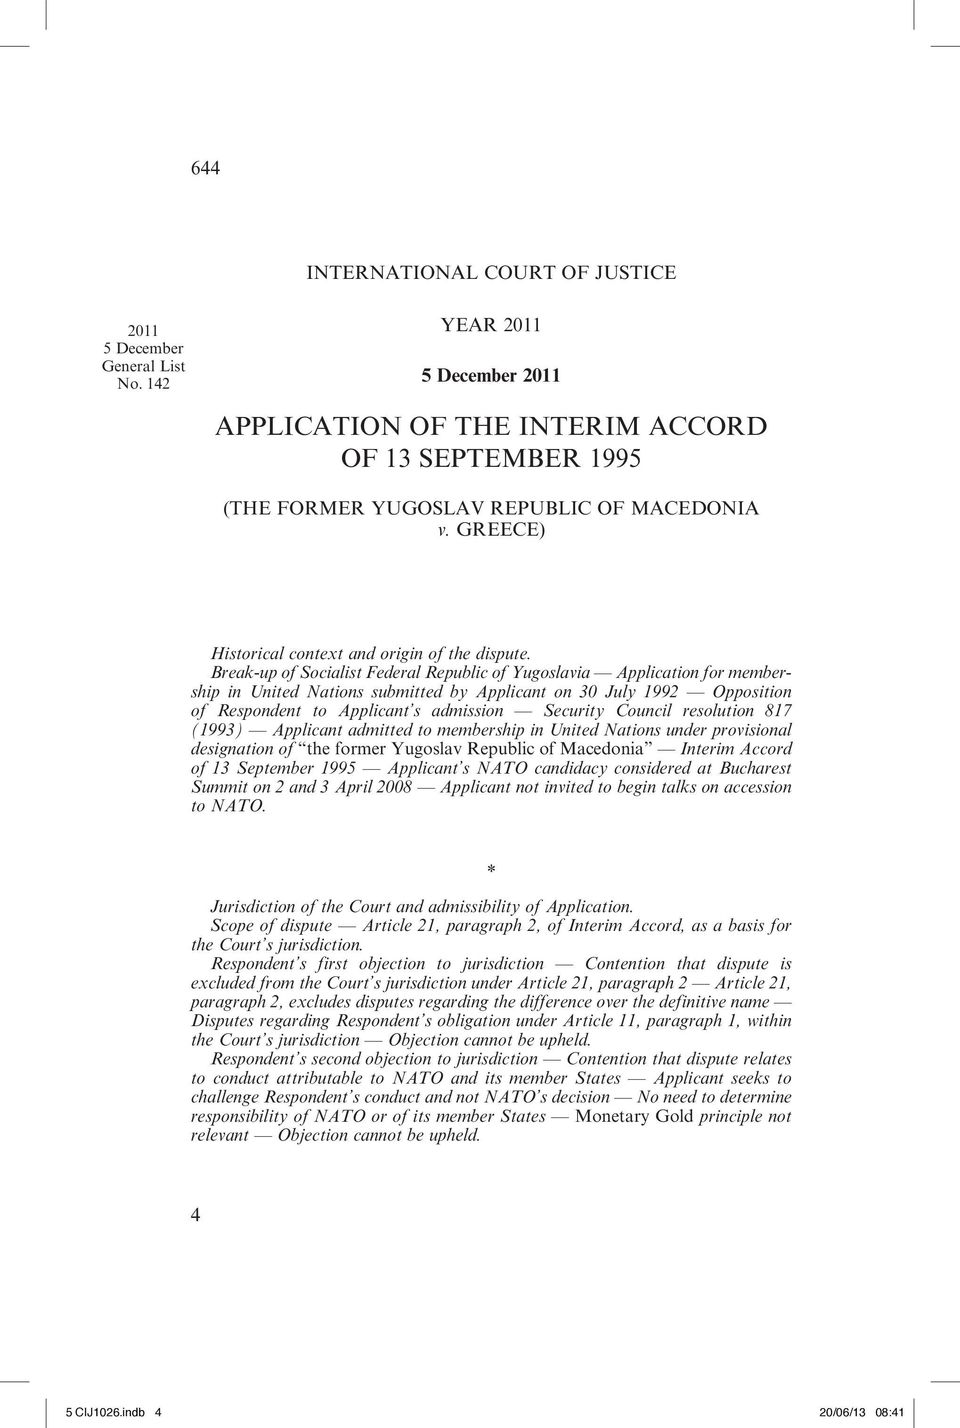 Break-up of Socialist Federal Republic of Yugoslavia Application for membership in United Nations submitted by Applicant on 30 July 1992 Opposition of Respondent to Applicant s admission Security